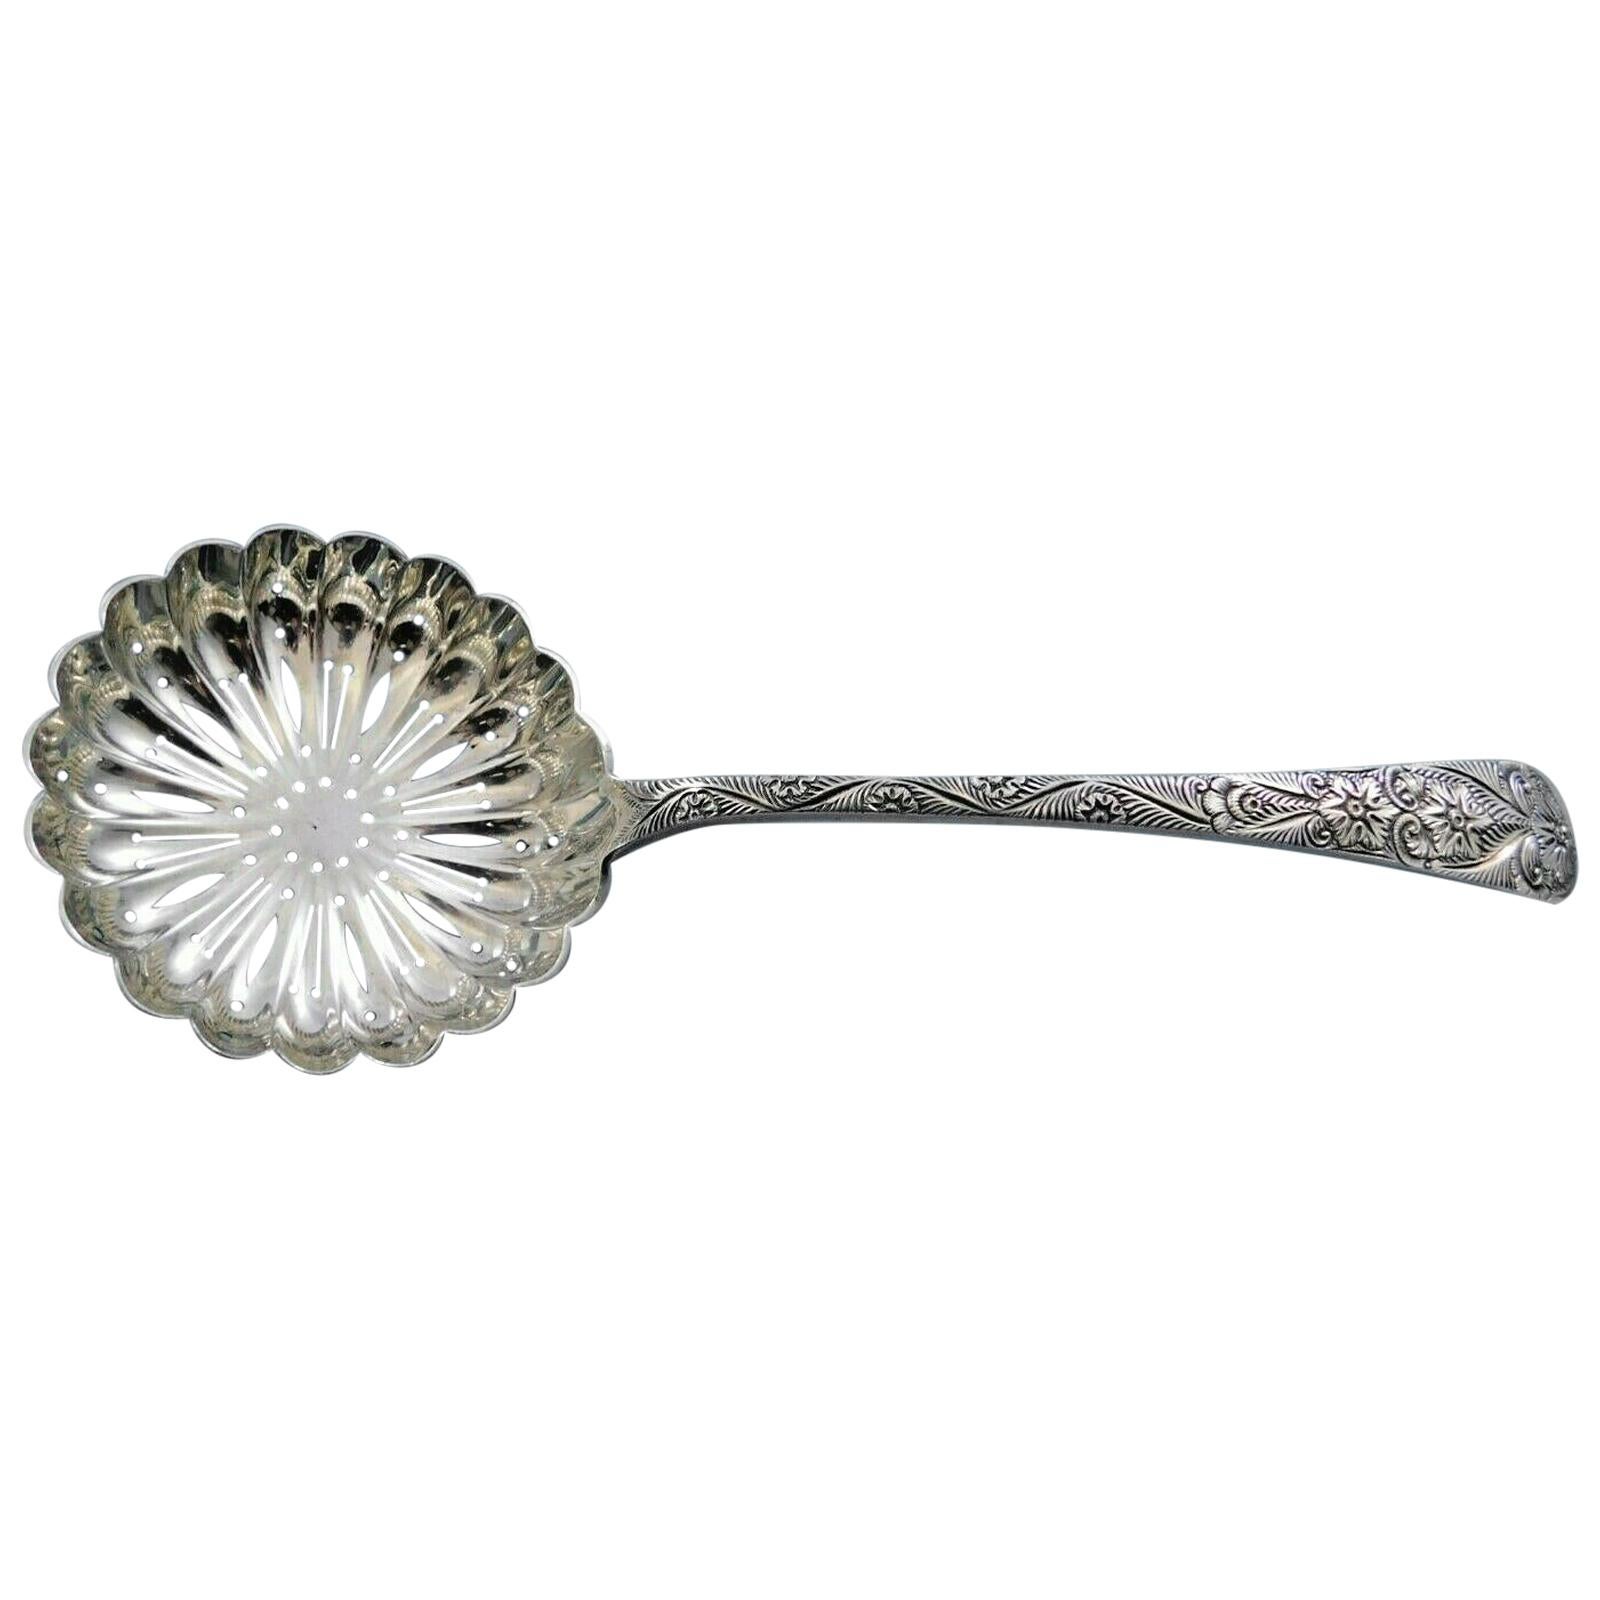 Antique Engraved by Tiffany & Co. Sterling Silver Pea Serving Spoon